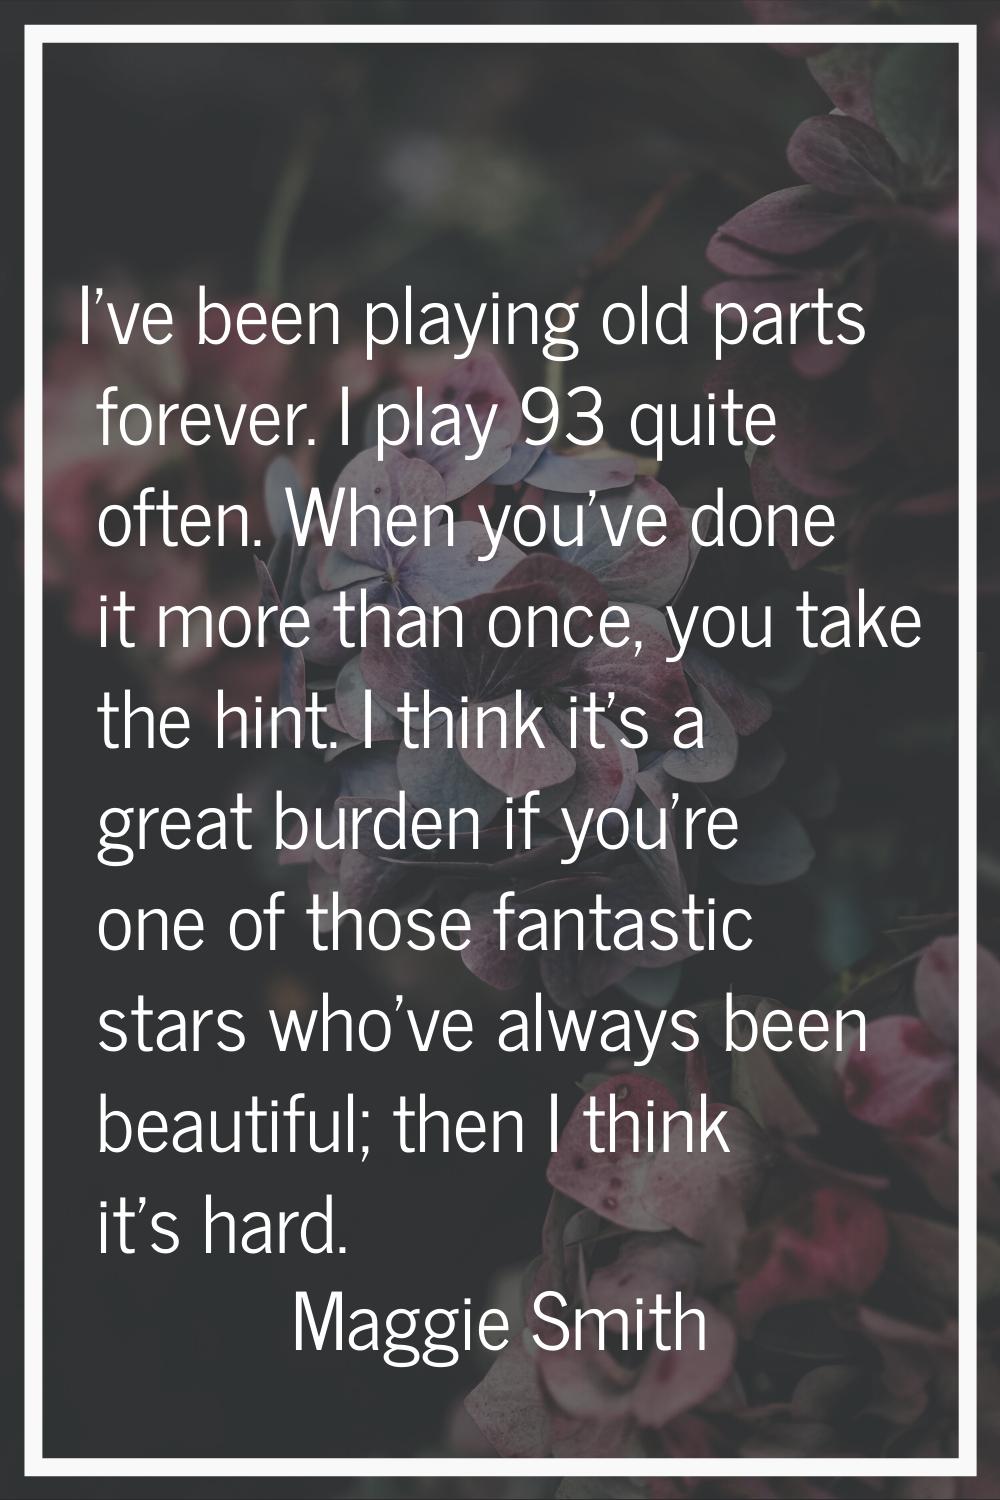 I've been playing old parts forever. I play 93 quite often. When you've done it more than once, you